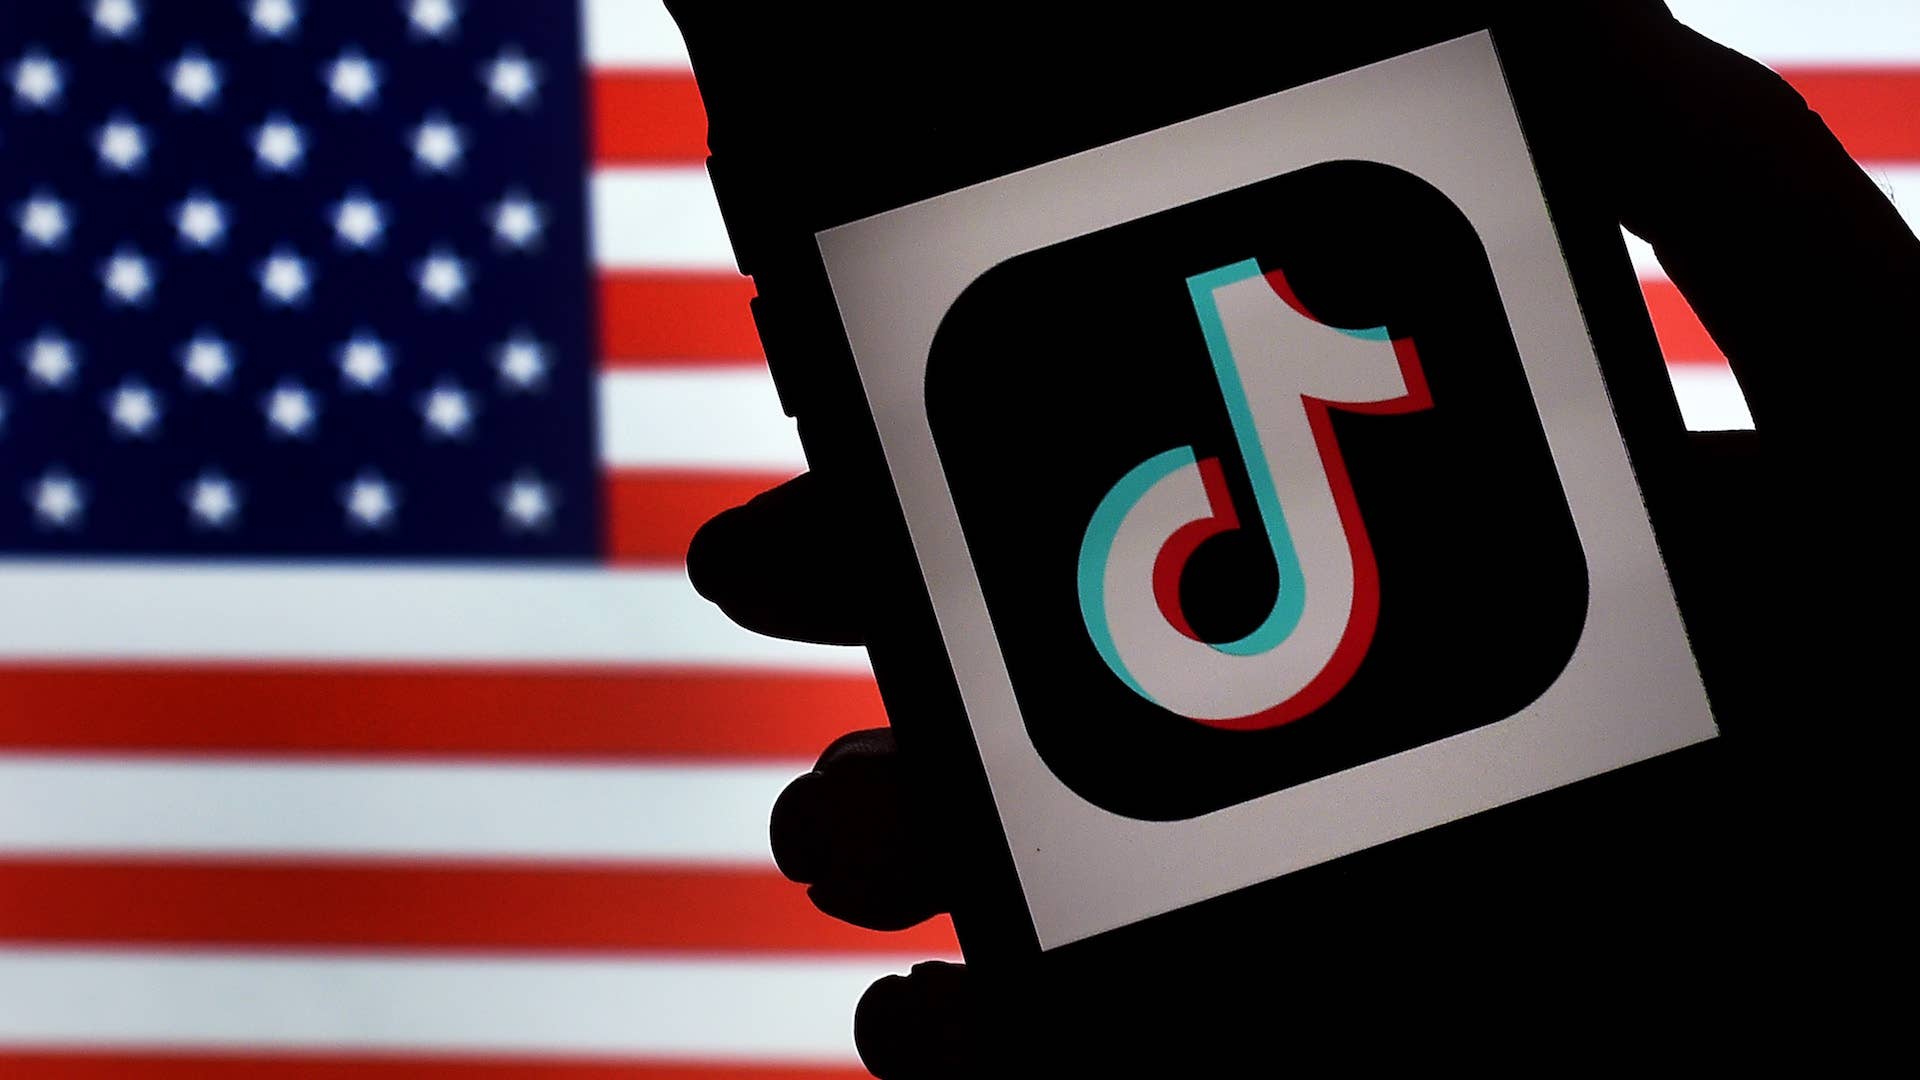 TikTok is displayed on the screen of an iPhone on an American flag background.